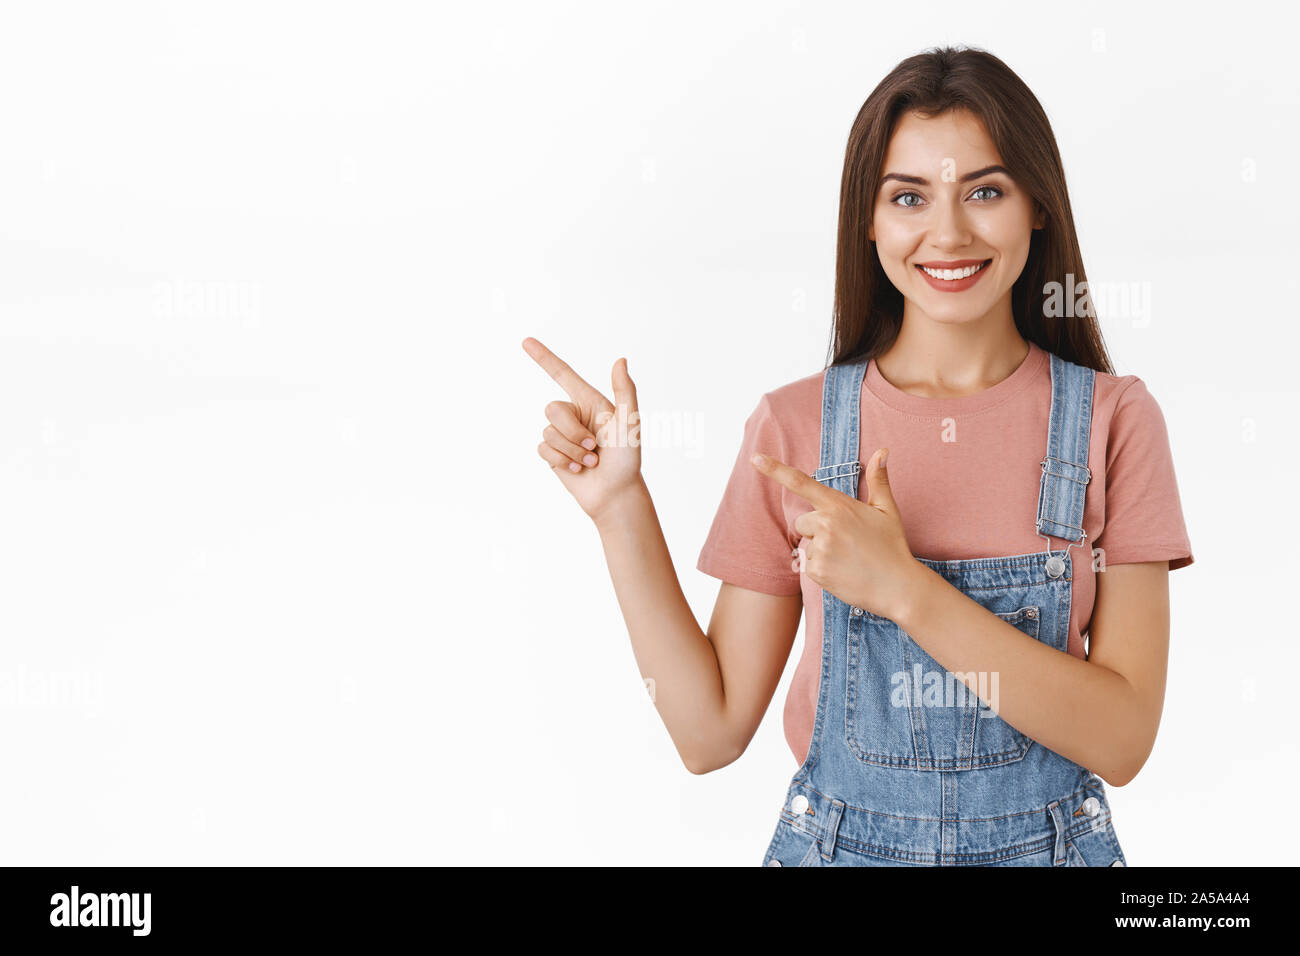 Modern good-lookin confident, assertive woman pointing upper left corner and smiling camera, recommend use promo coupon or suggest good choice for Stock Photo